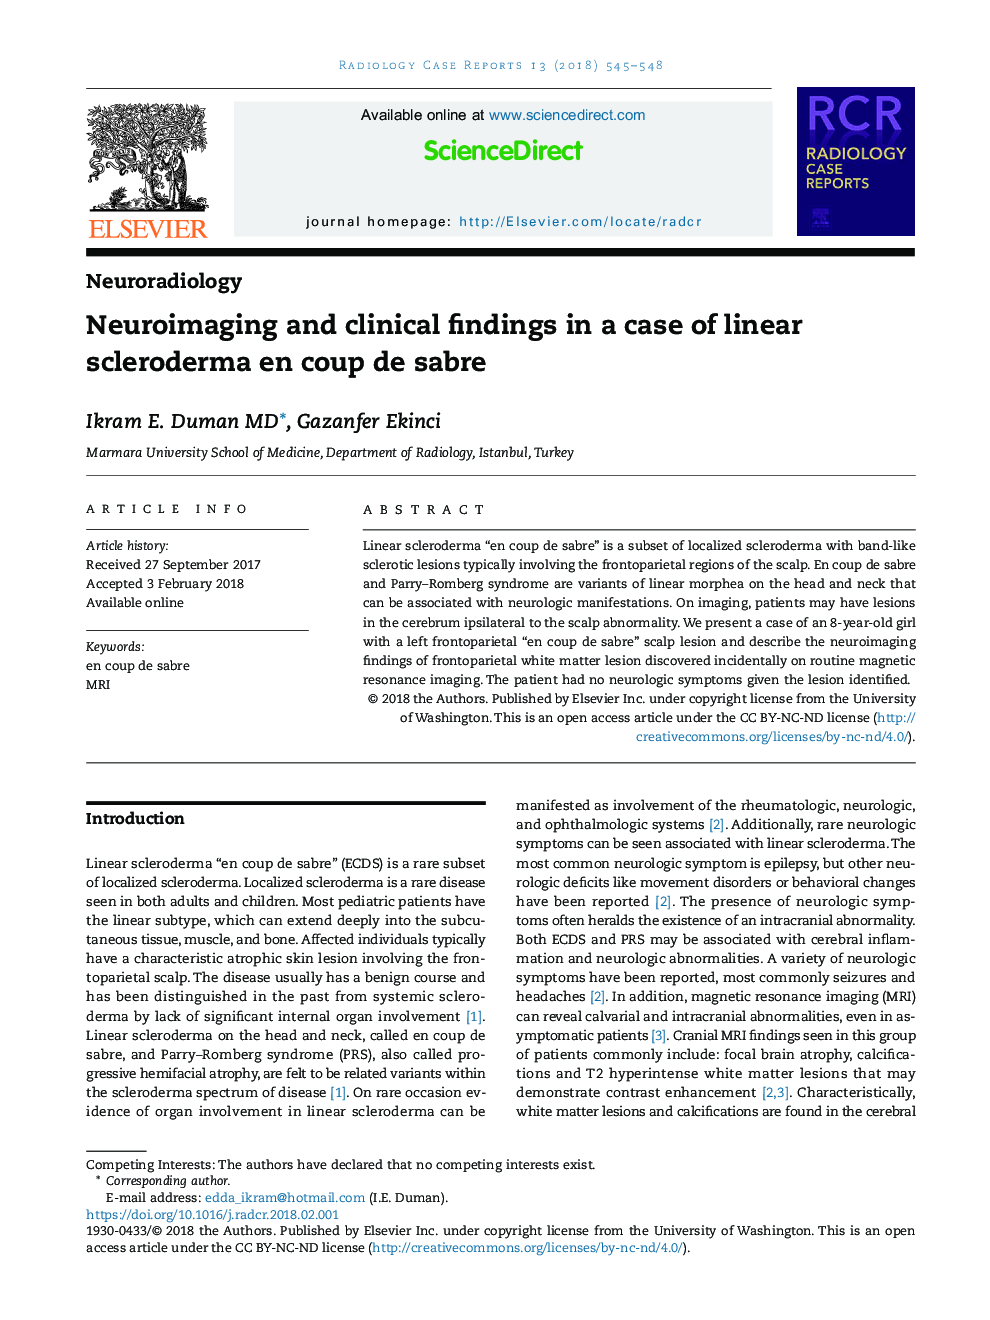 Neuroimaging and clinical findings in a case of linear scleroderma en coup de sabre